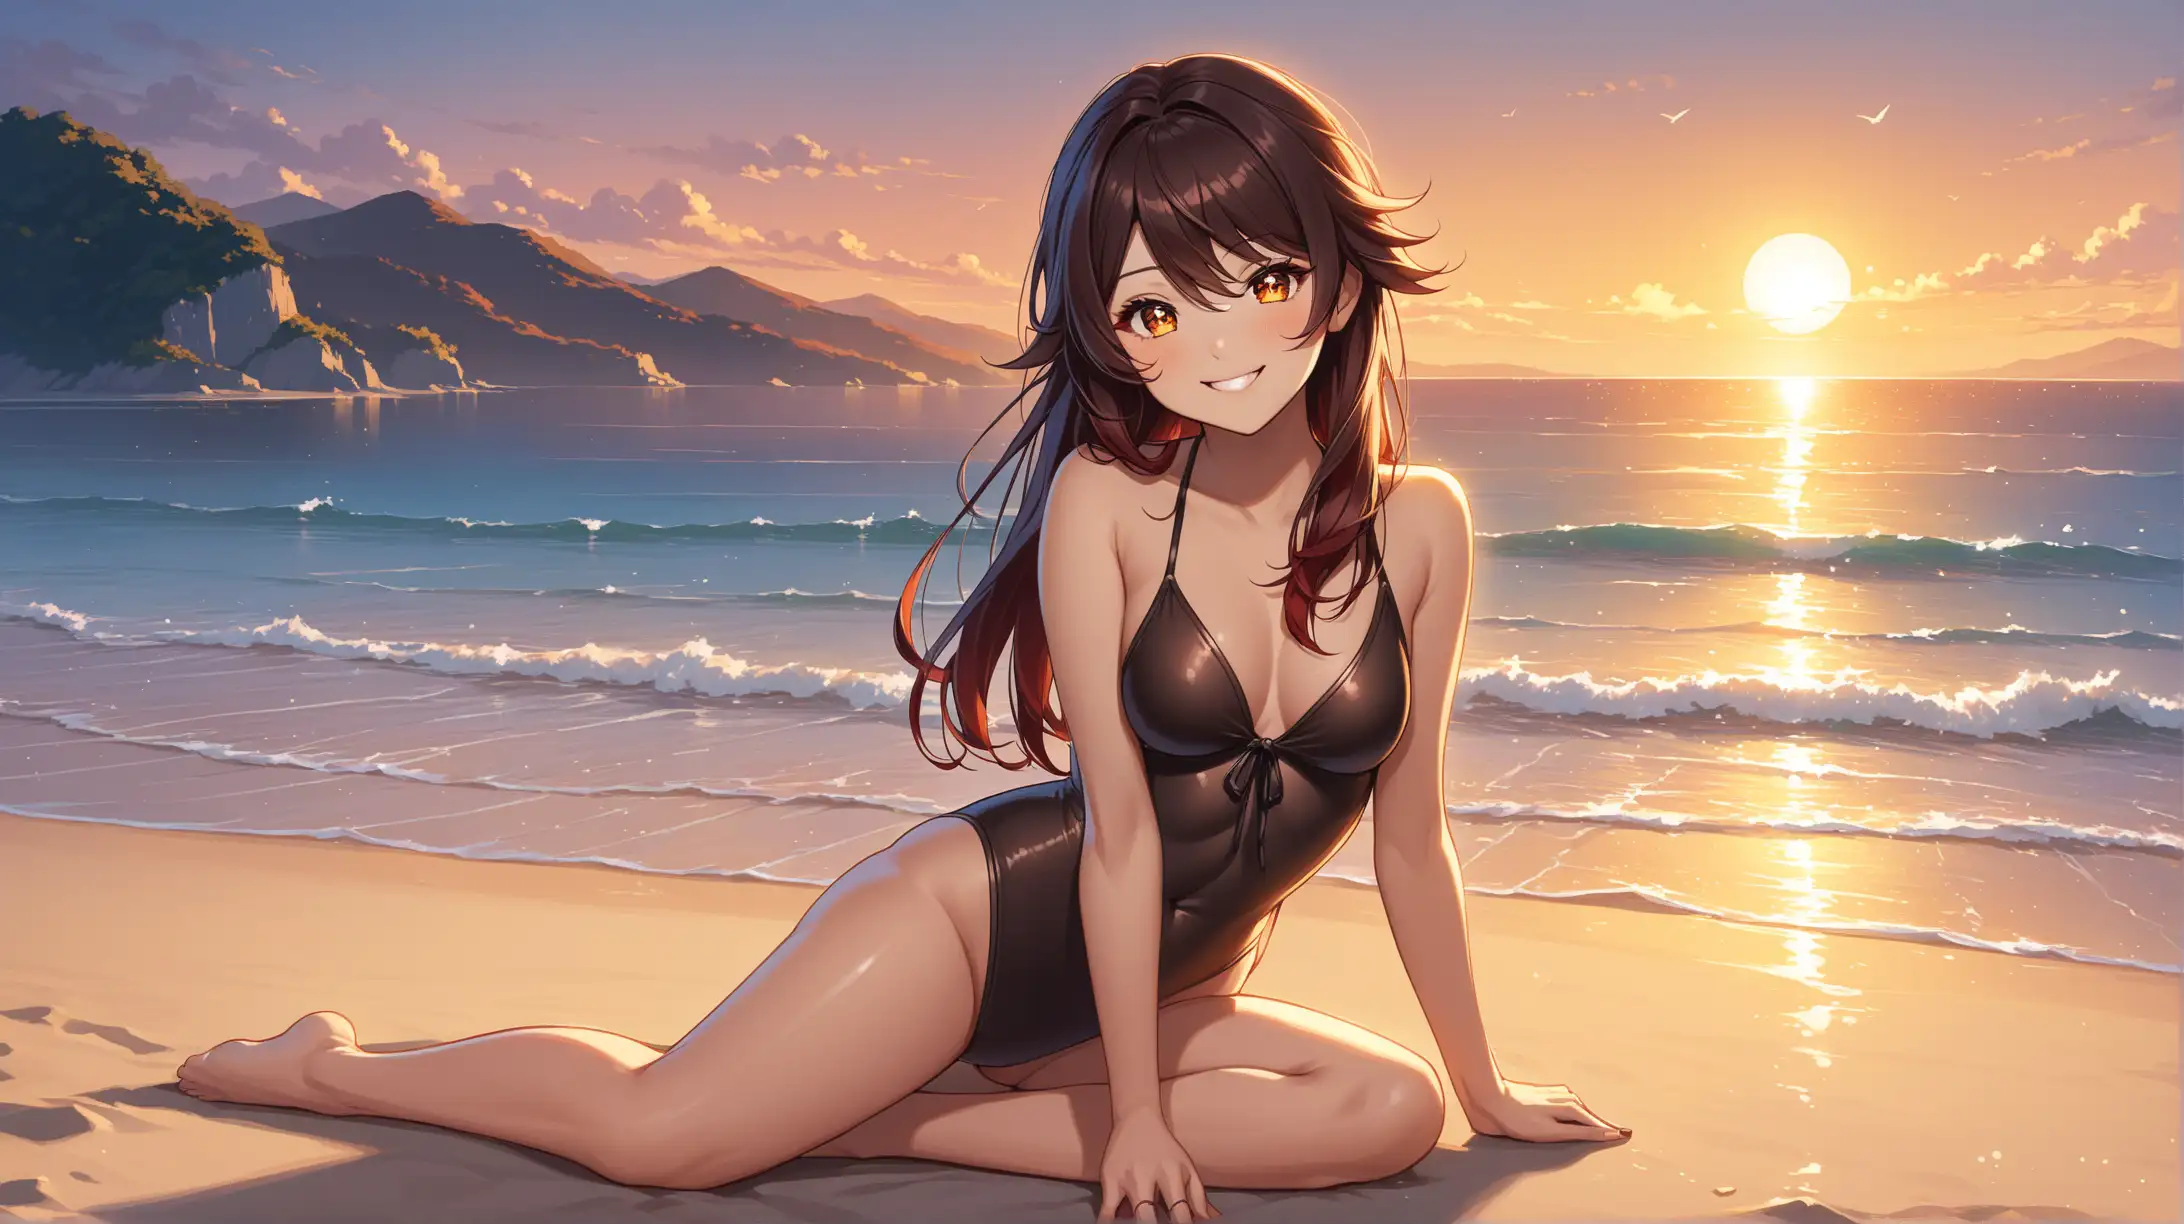 Draw the character Hu Tao, sitting in a striking pose, alone on a beach, in the evening, wearing a swimsuit, smiling at the viewer